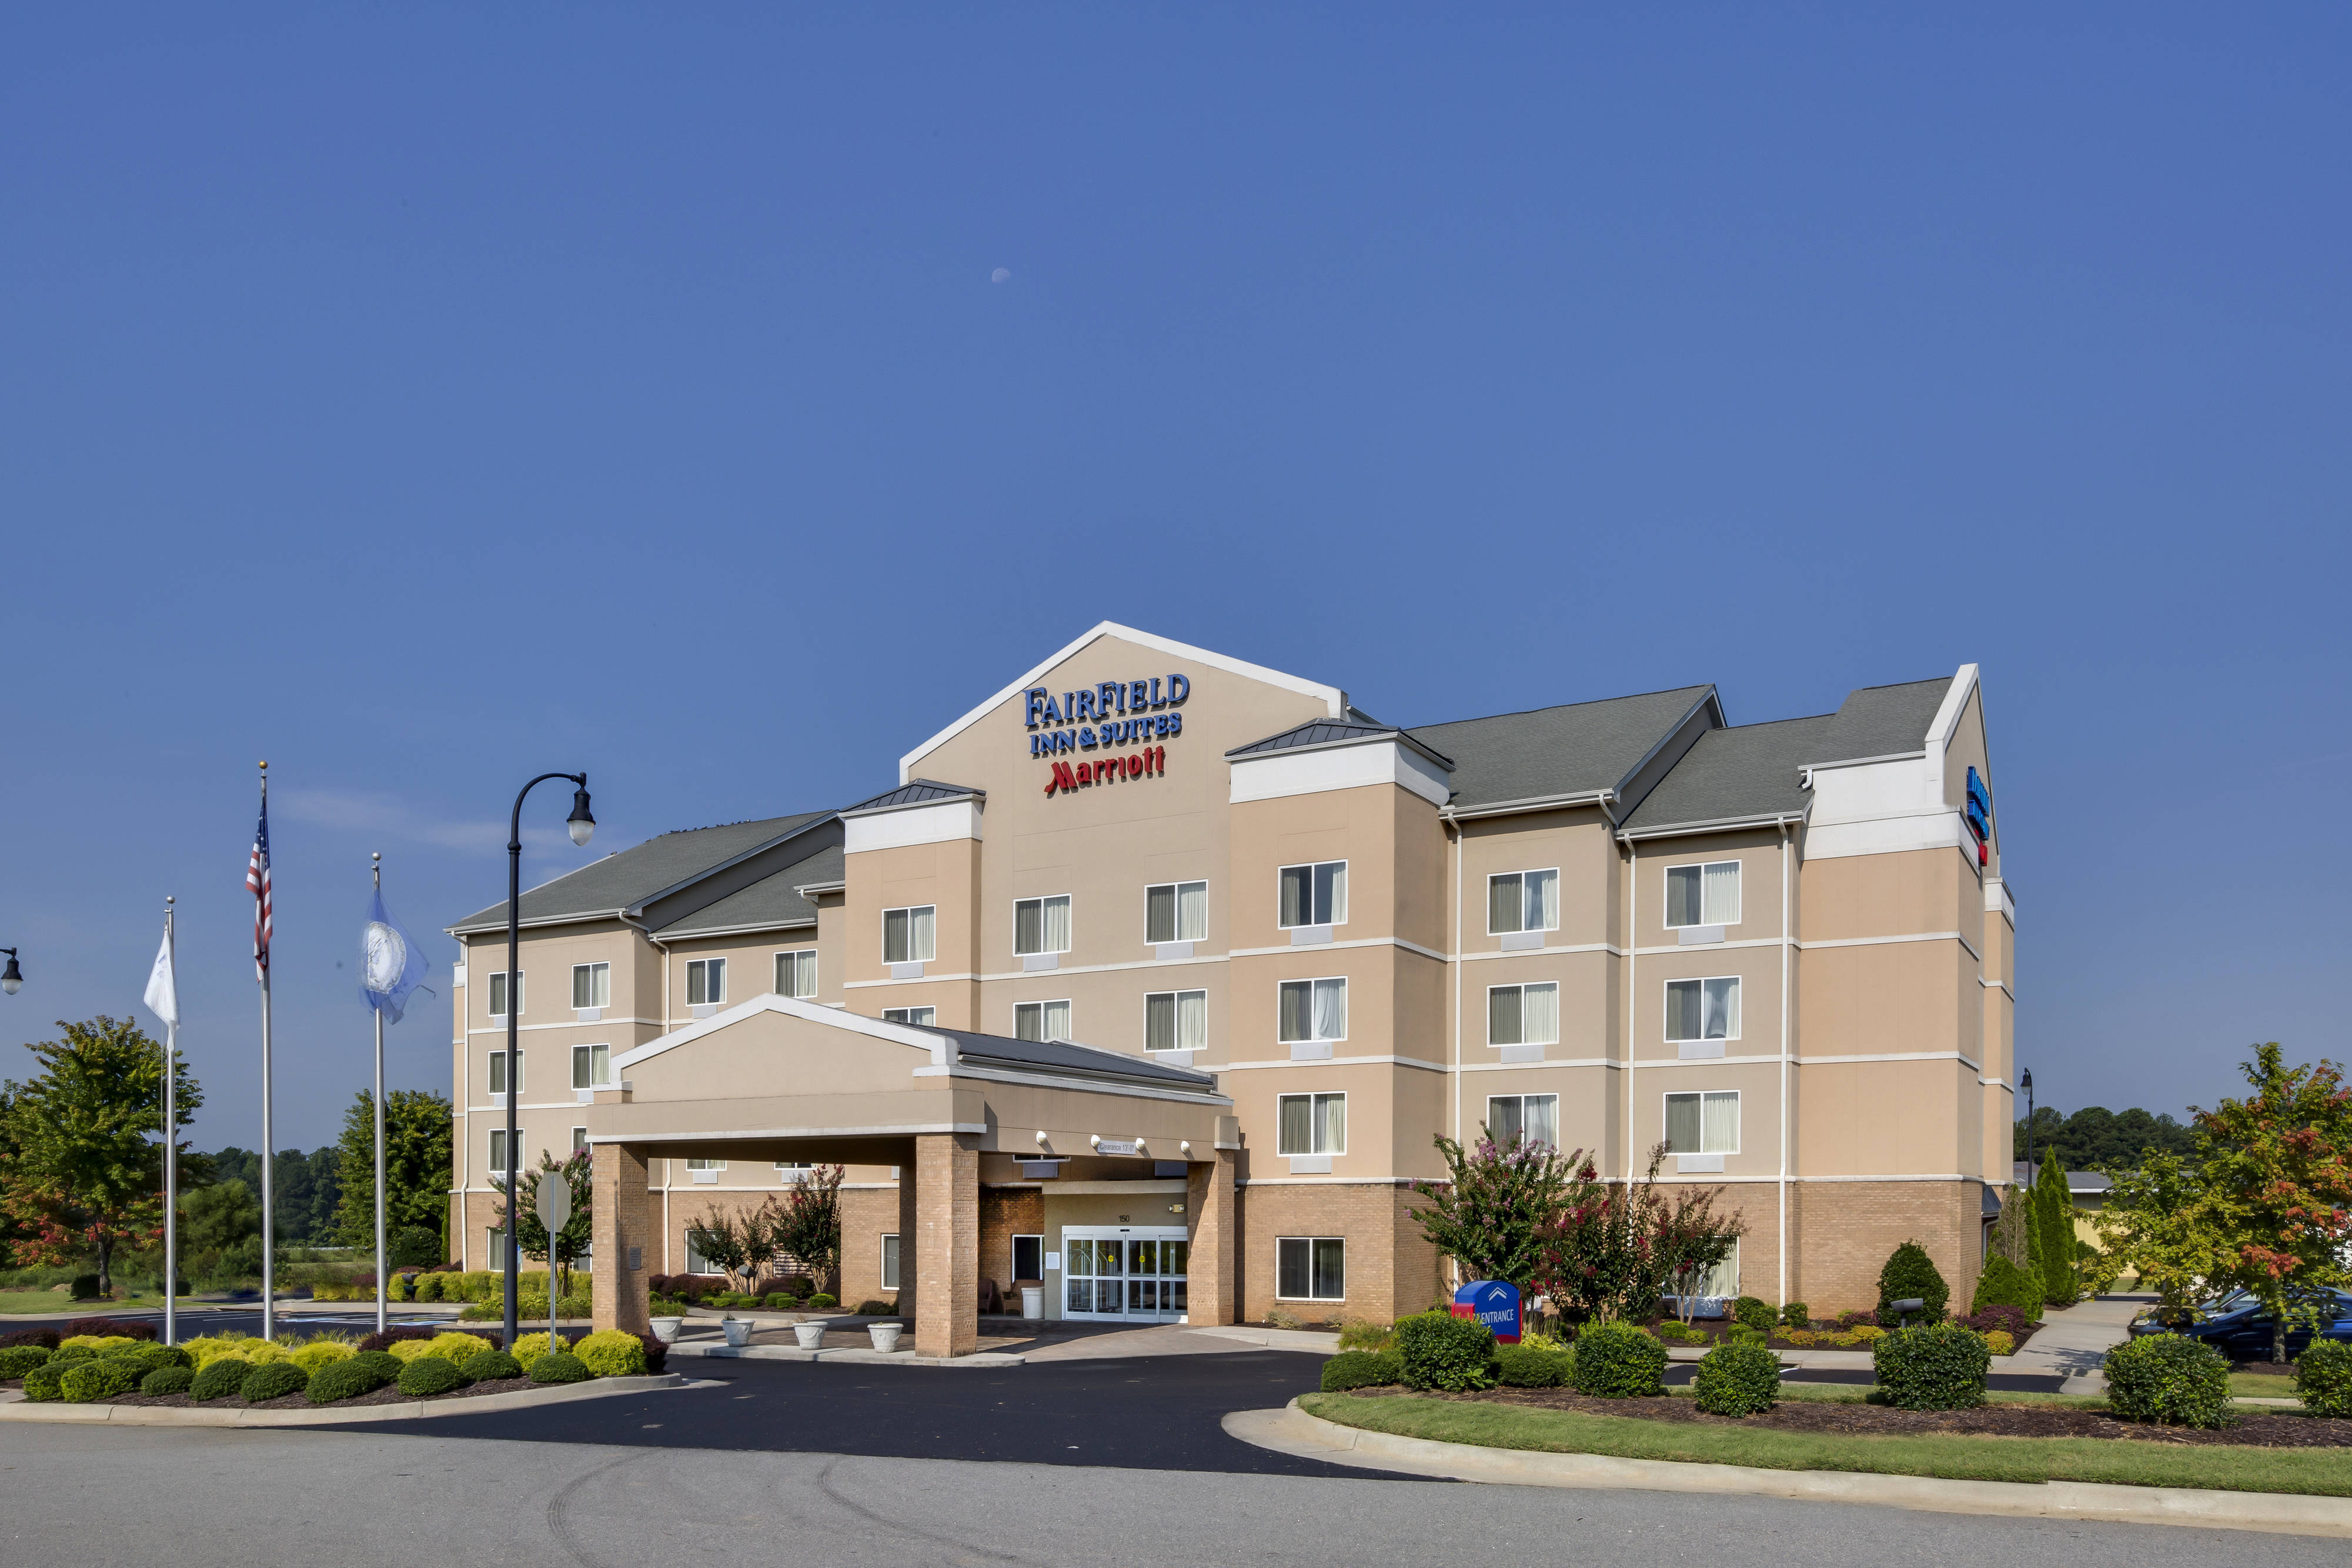 Photo of Fairfield Inn & Suites by Marriott South Hill I-85, South Hill, VA